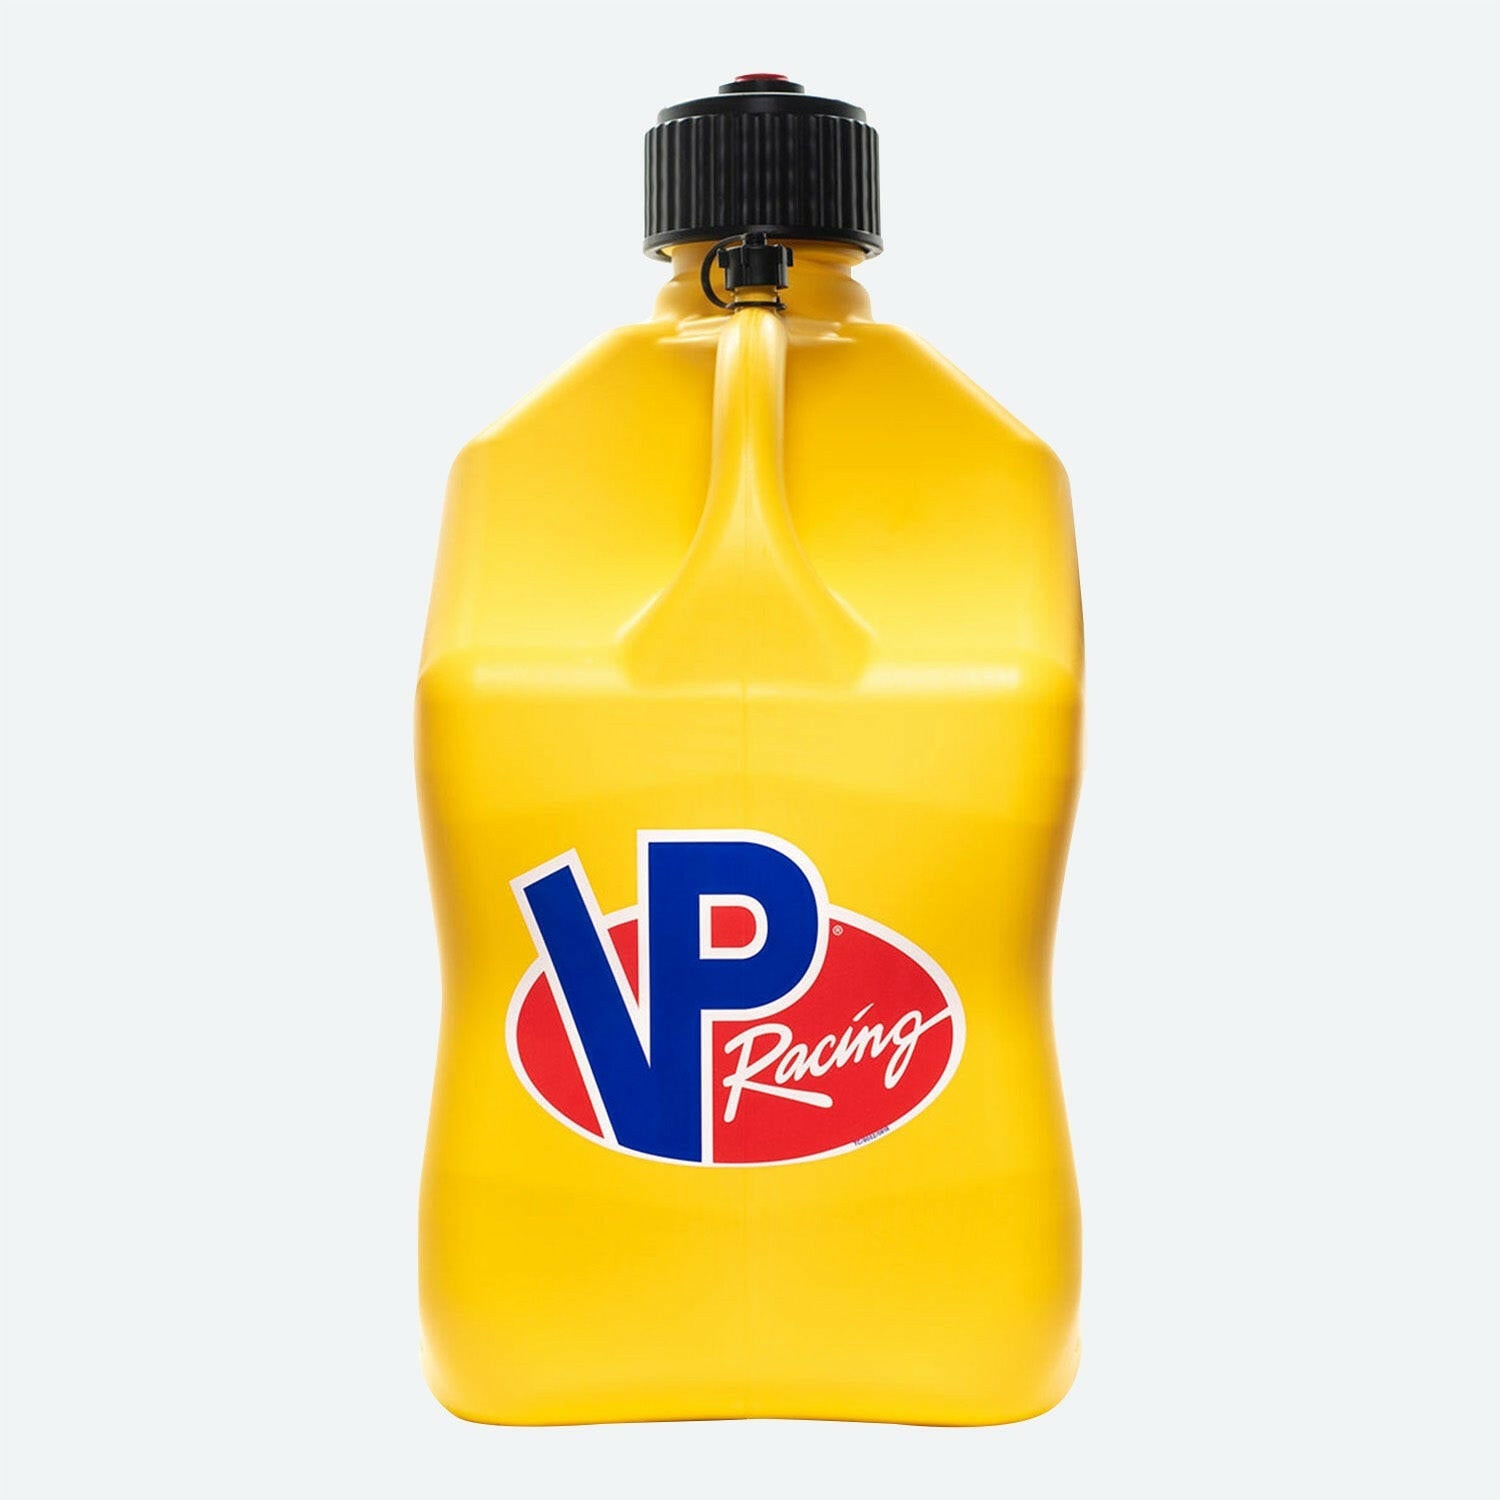 A yellow PPF 5.5-Gallon Motorsport Container® utility jug - Square. with a black cap. It features an oval logo with &quot;VP Racing&quot; in blue and red letters.